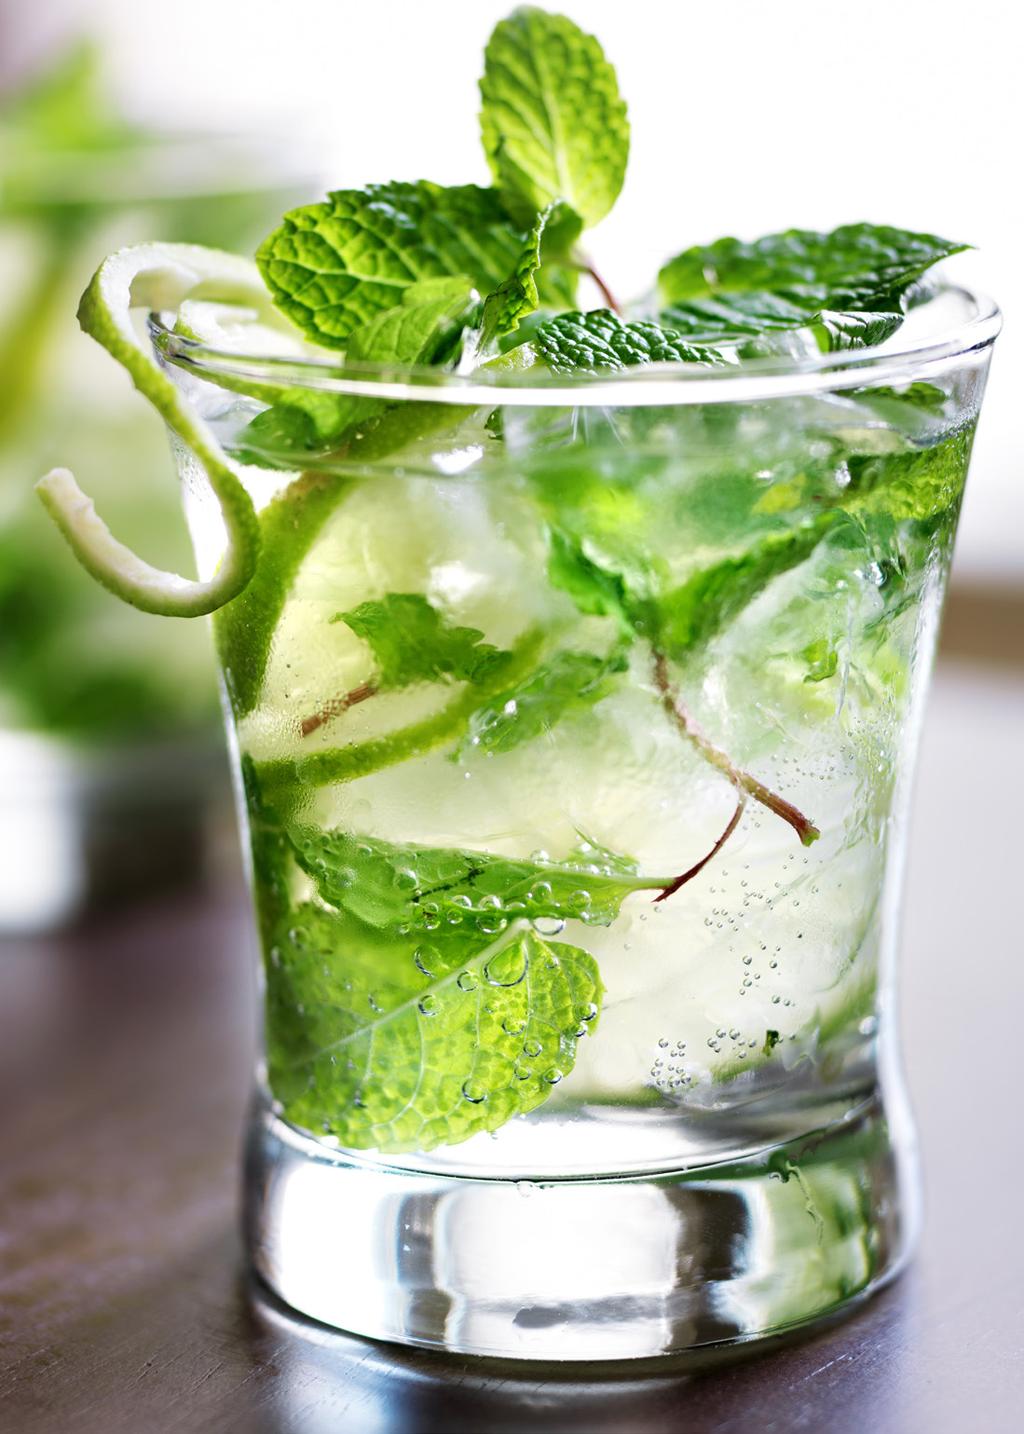 Mojito Mocktail Try a refreshing, non-alcoholic mojito cocktail recipe that skips the usual rum to create a booze-free blend for parties.